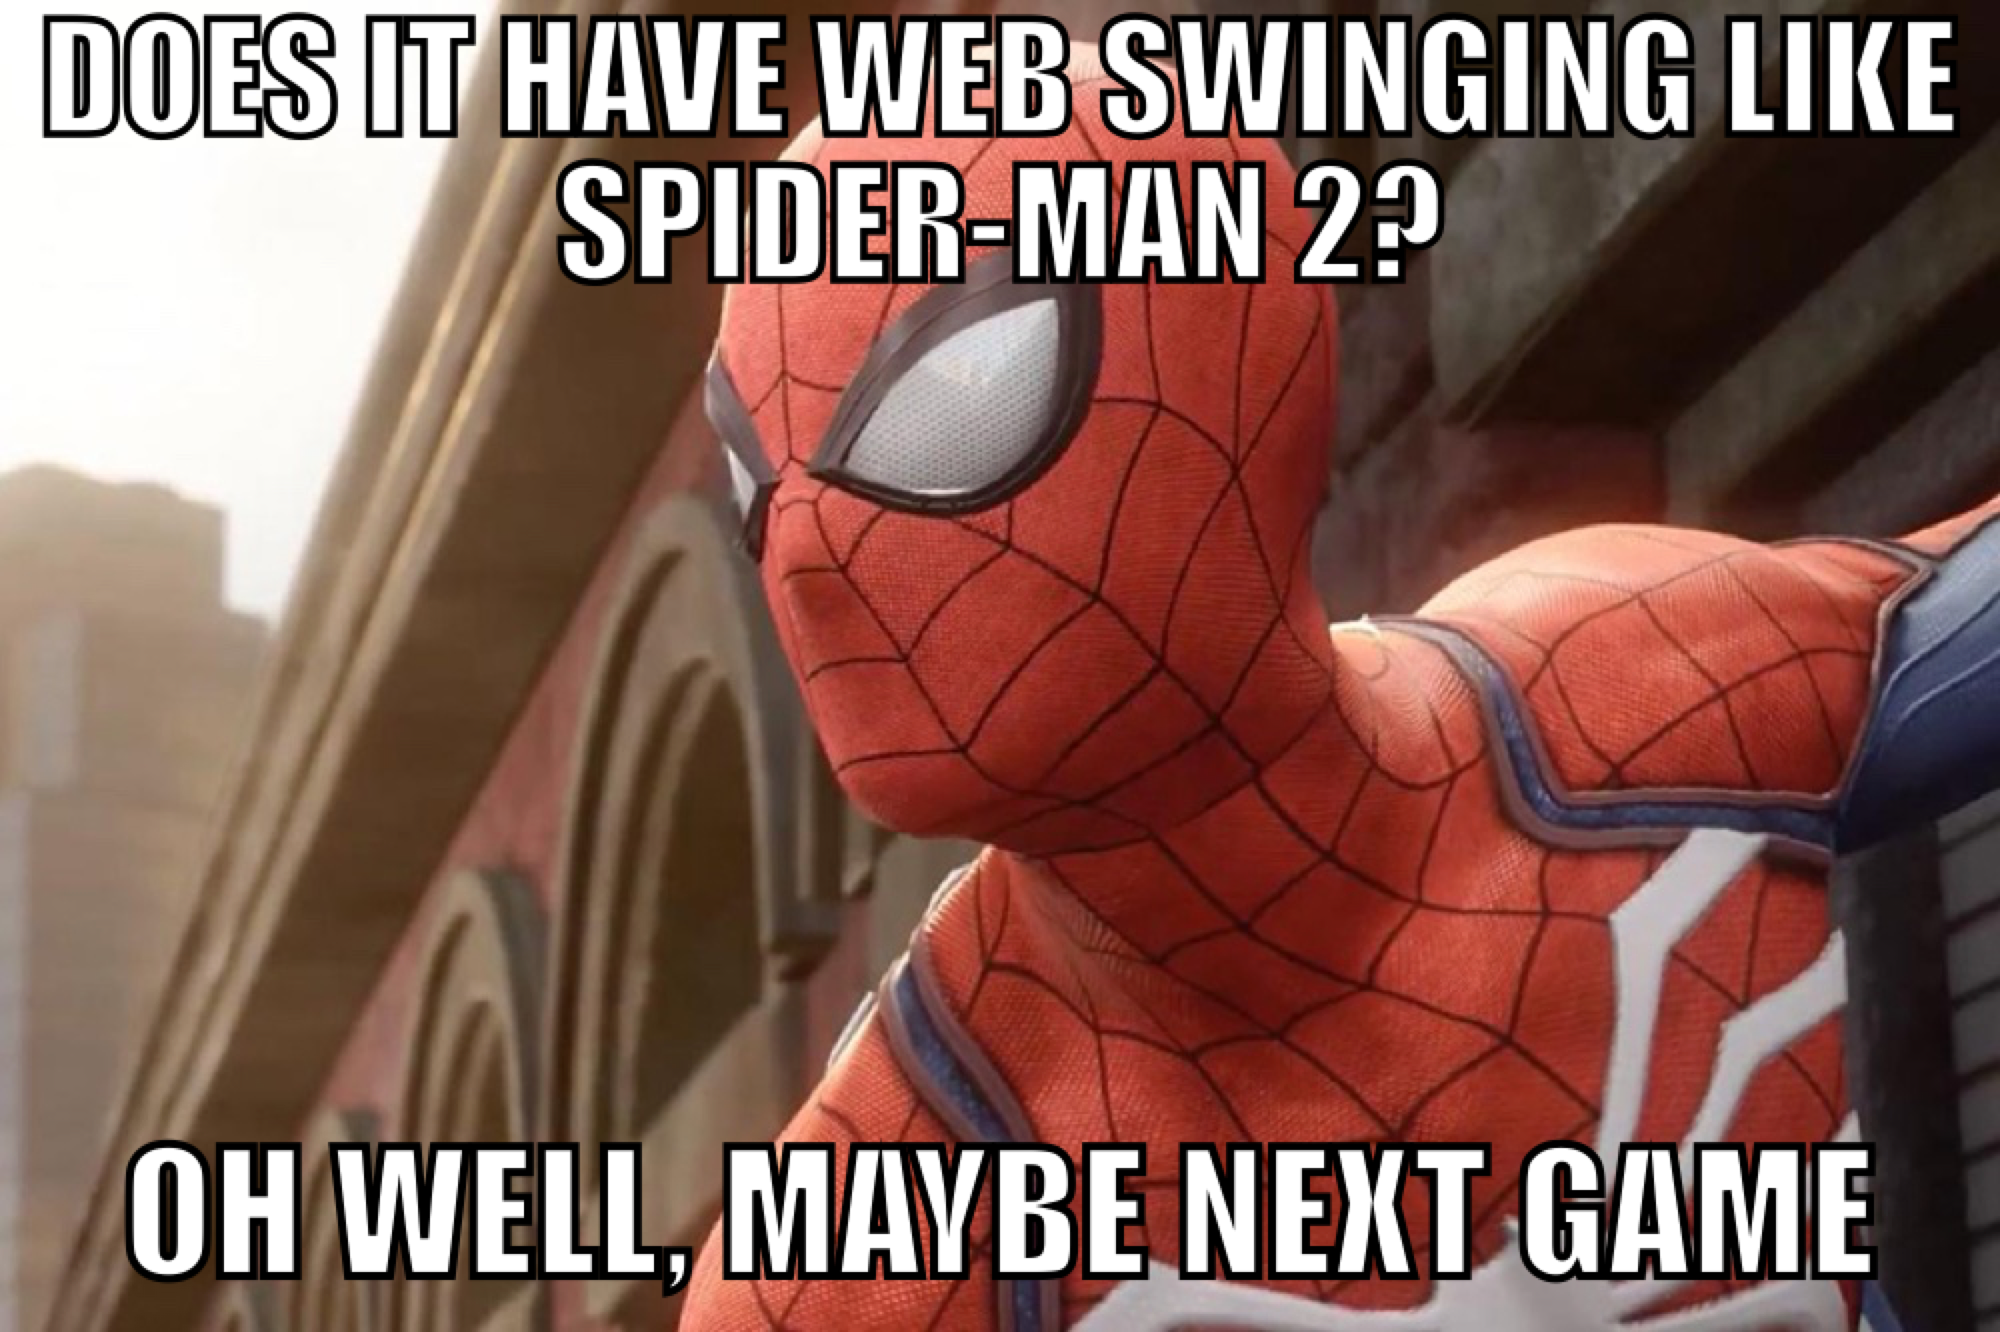 puducherry - Does It Have Web Swinging SpiderMan 2? Oh Well, Maybe Next Game